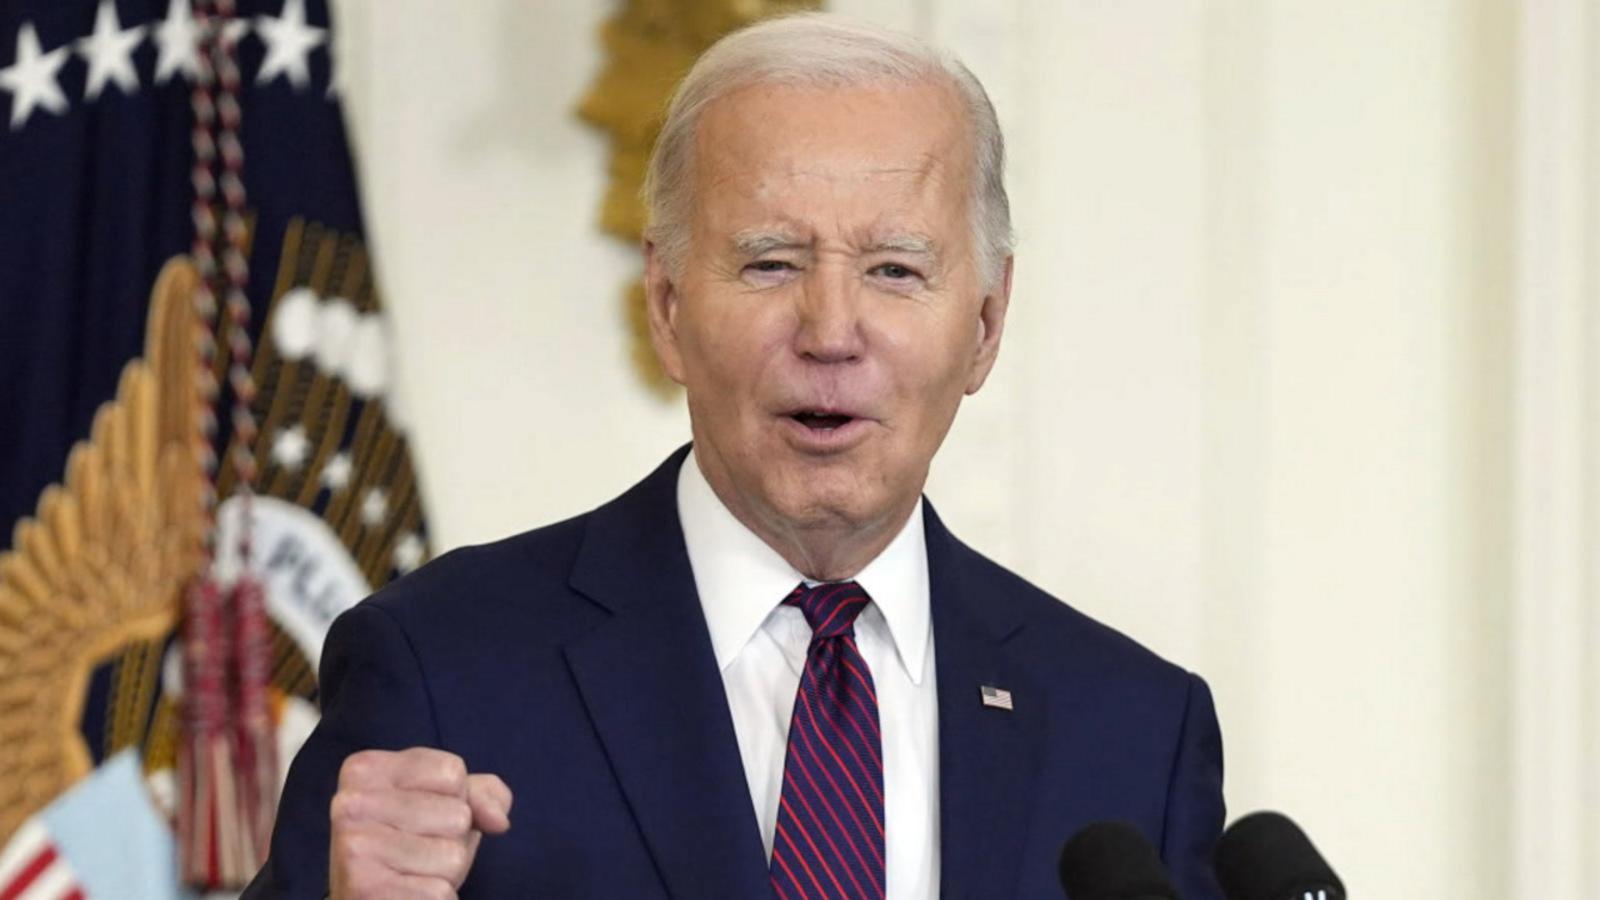 VIDEO: Biden and Trump projected winners of Michigan primary